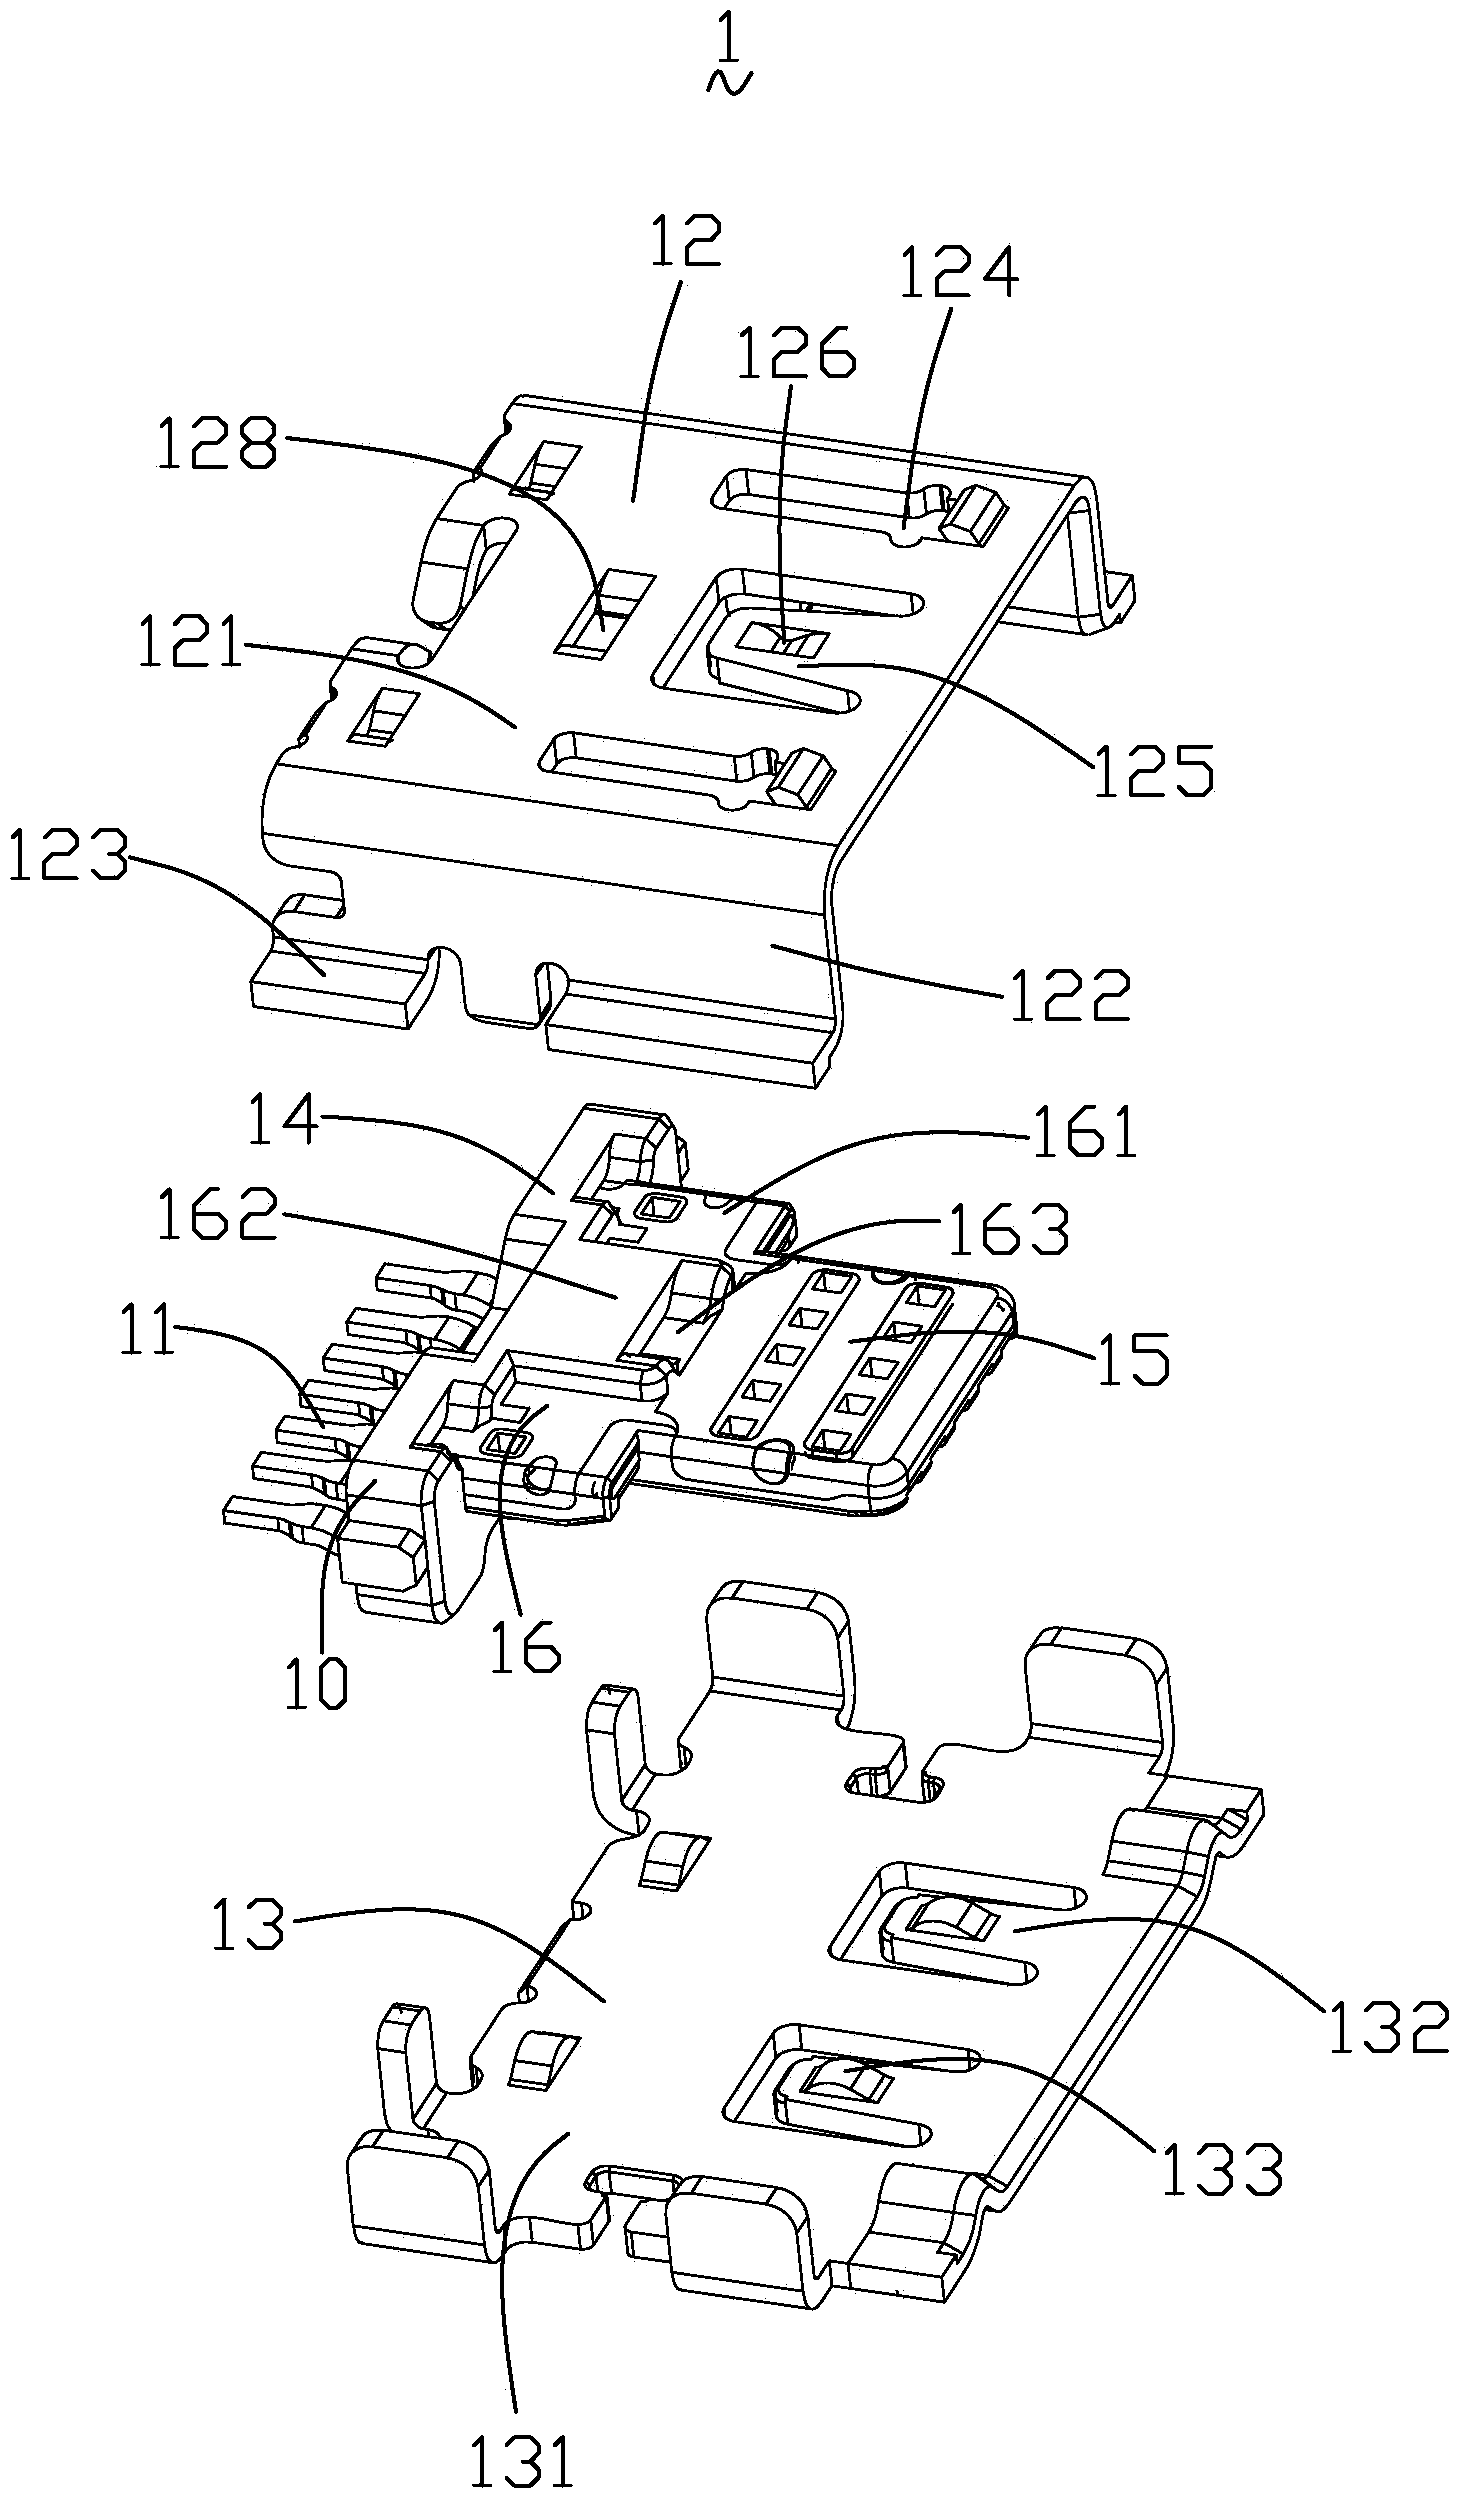 General assembly type seven-pin USB (Universal Serial Bus) socket, plug and connector assembly